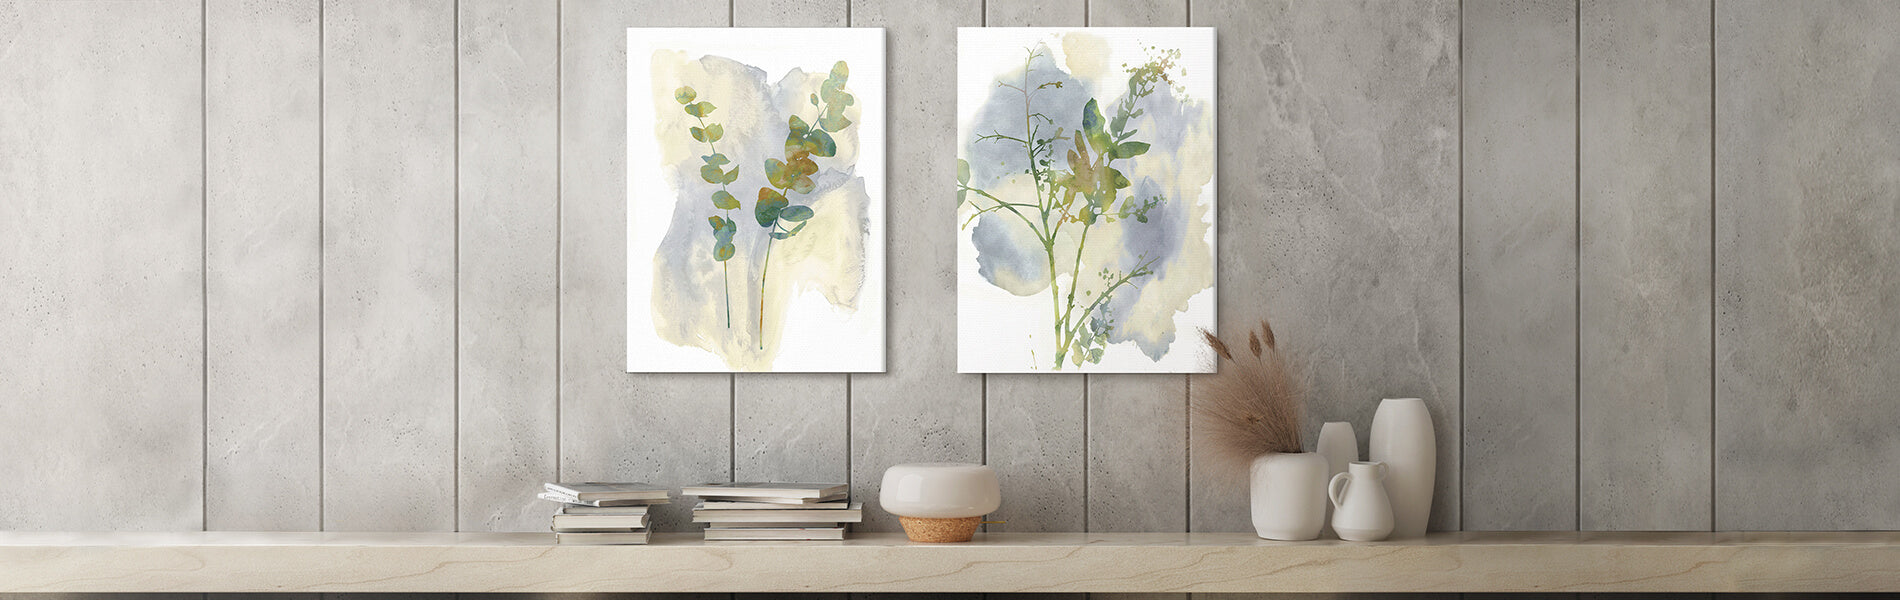 This Is Why You Need Our New Canvas Art Sets – Fineartcanvas.com